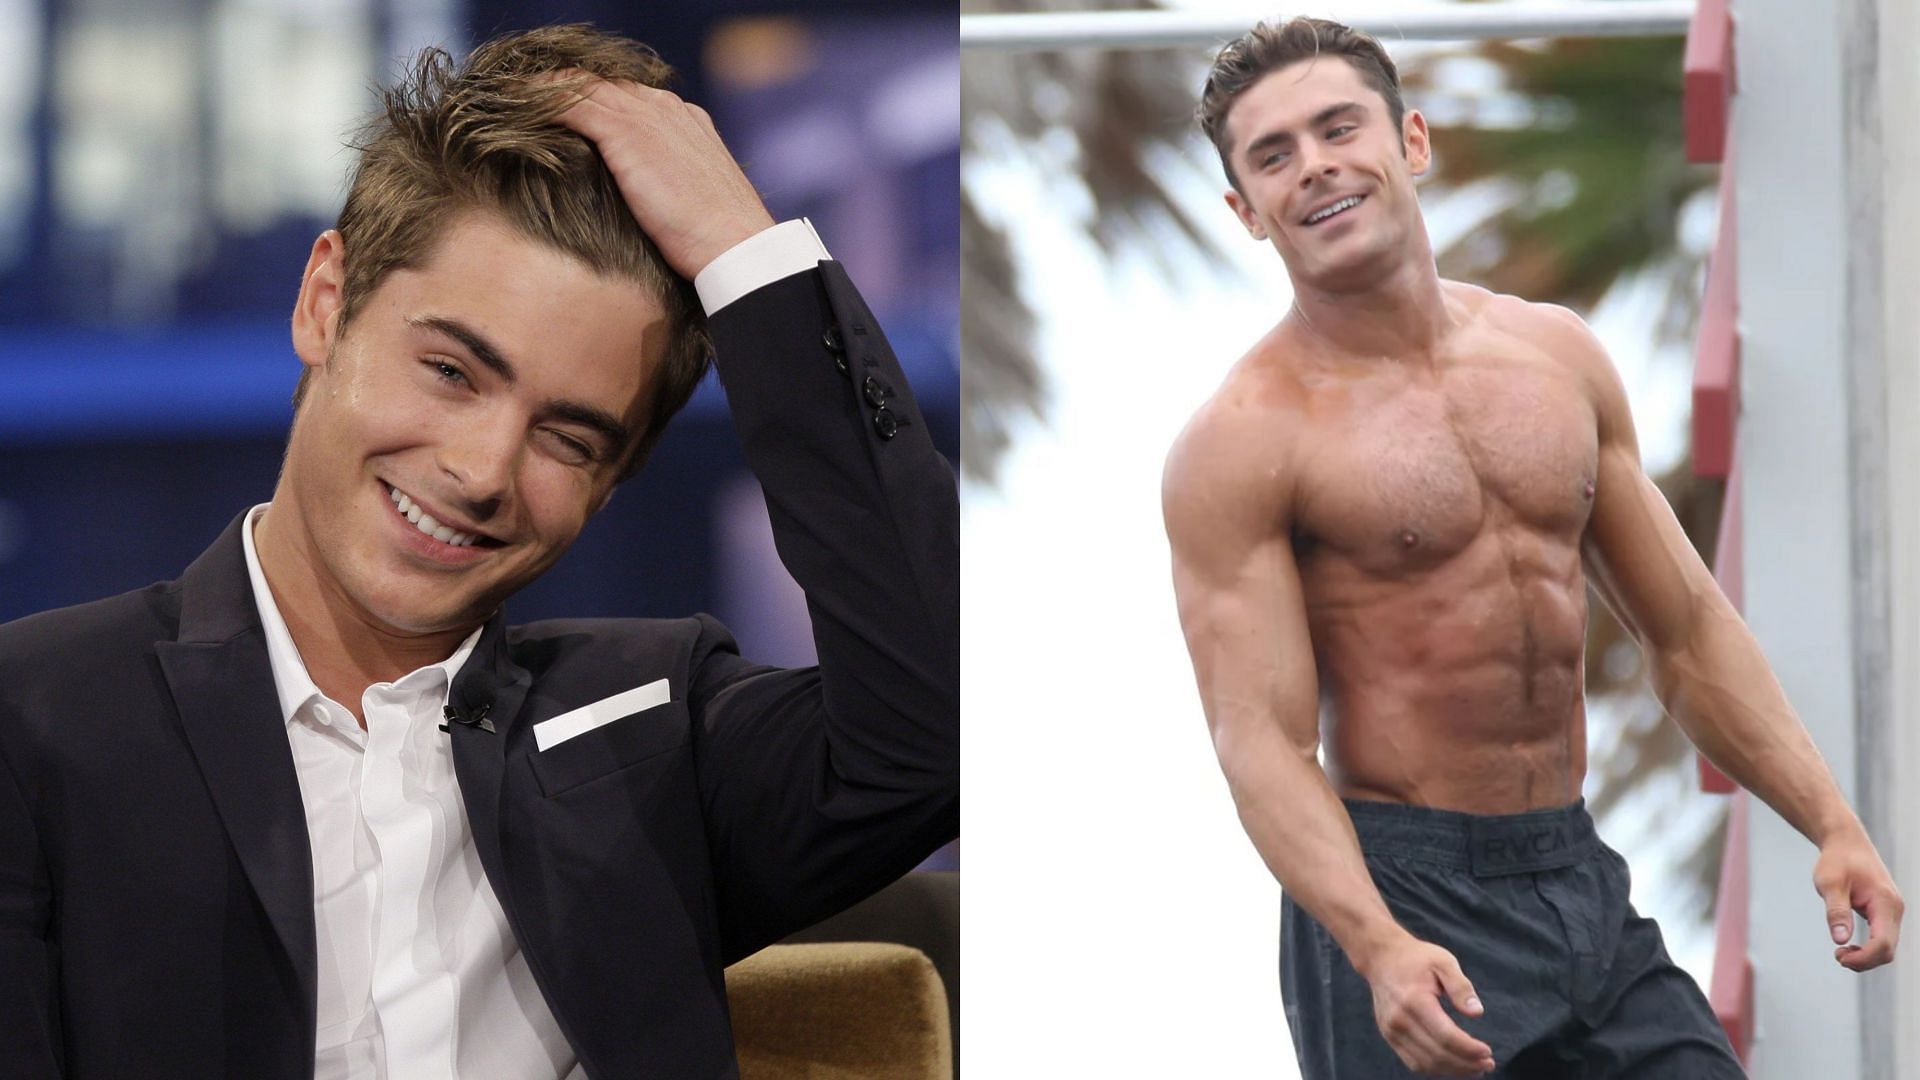 Zac Efron will play the role of WWE Hall of Famer Kevin Von Erich in a new movie